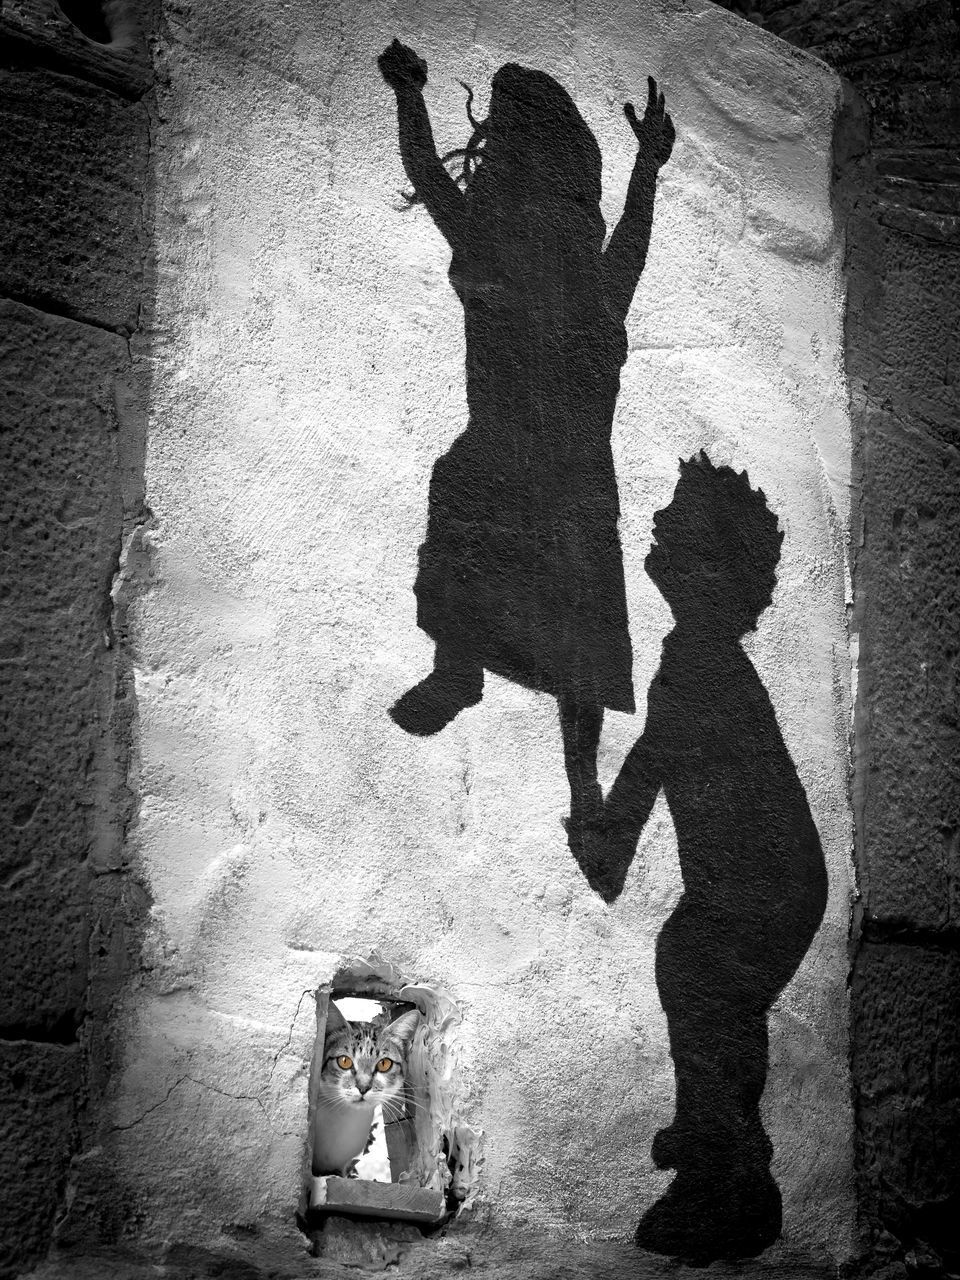 SHADOW OF WOMAN ON WALL WITH ARMS